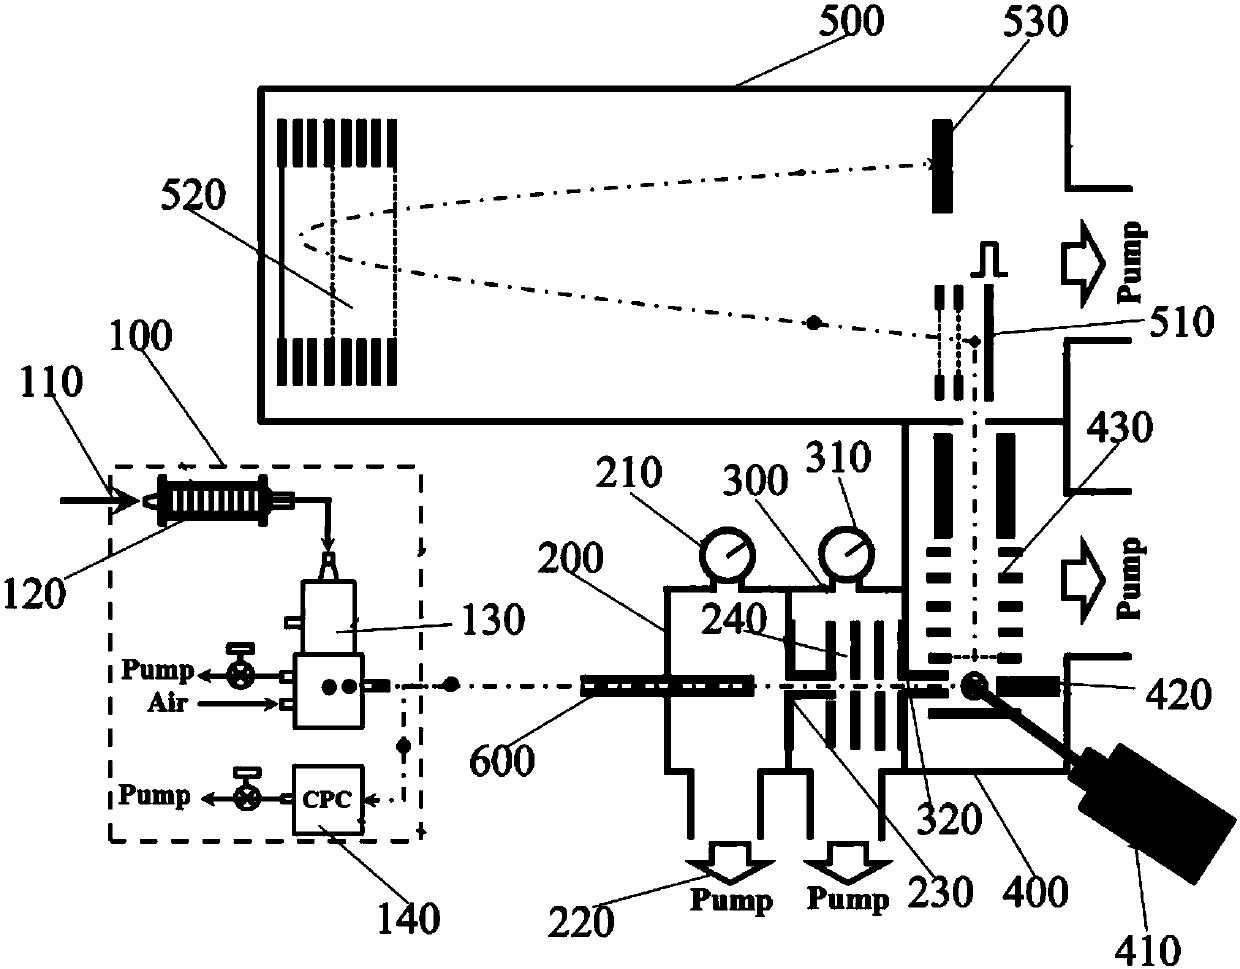 Aerosol mass spectrometer for measuring chemical components of nanoparticles